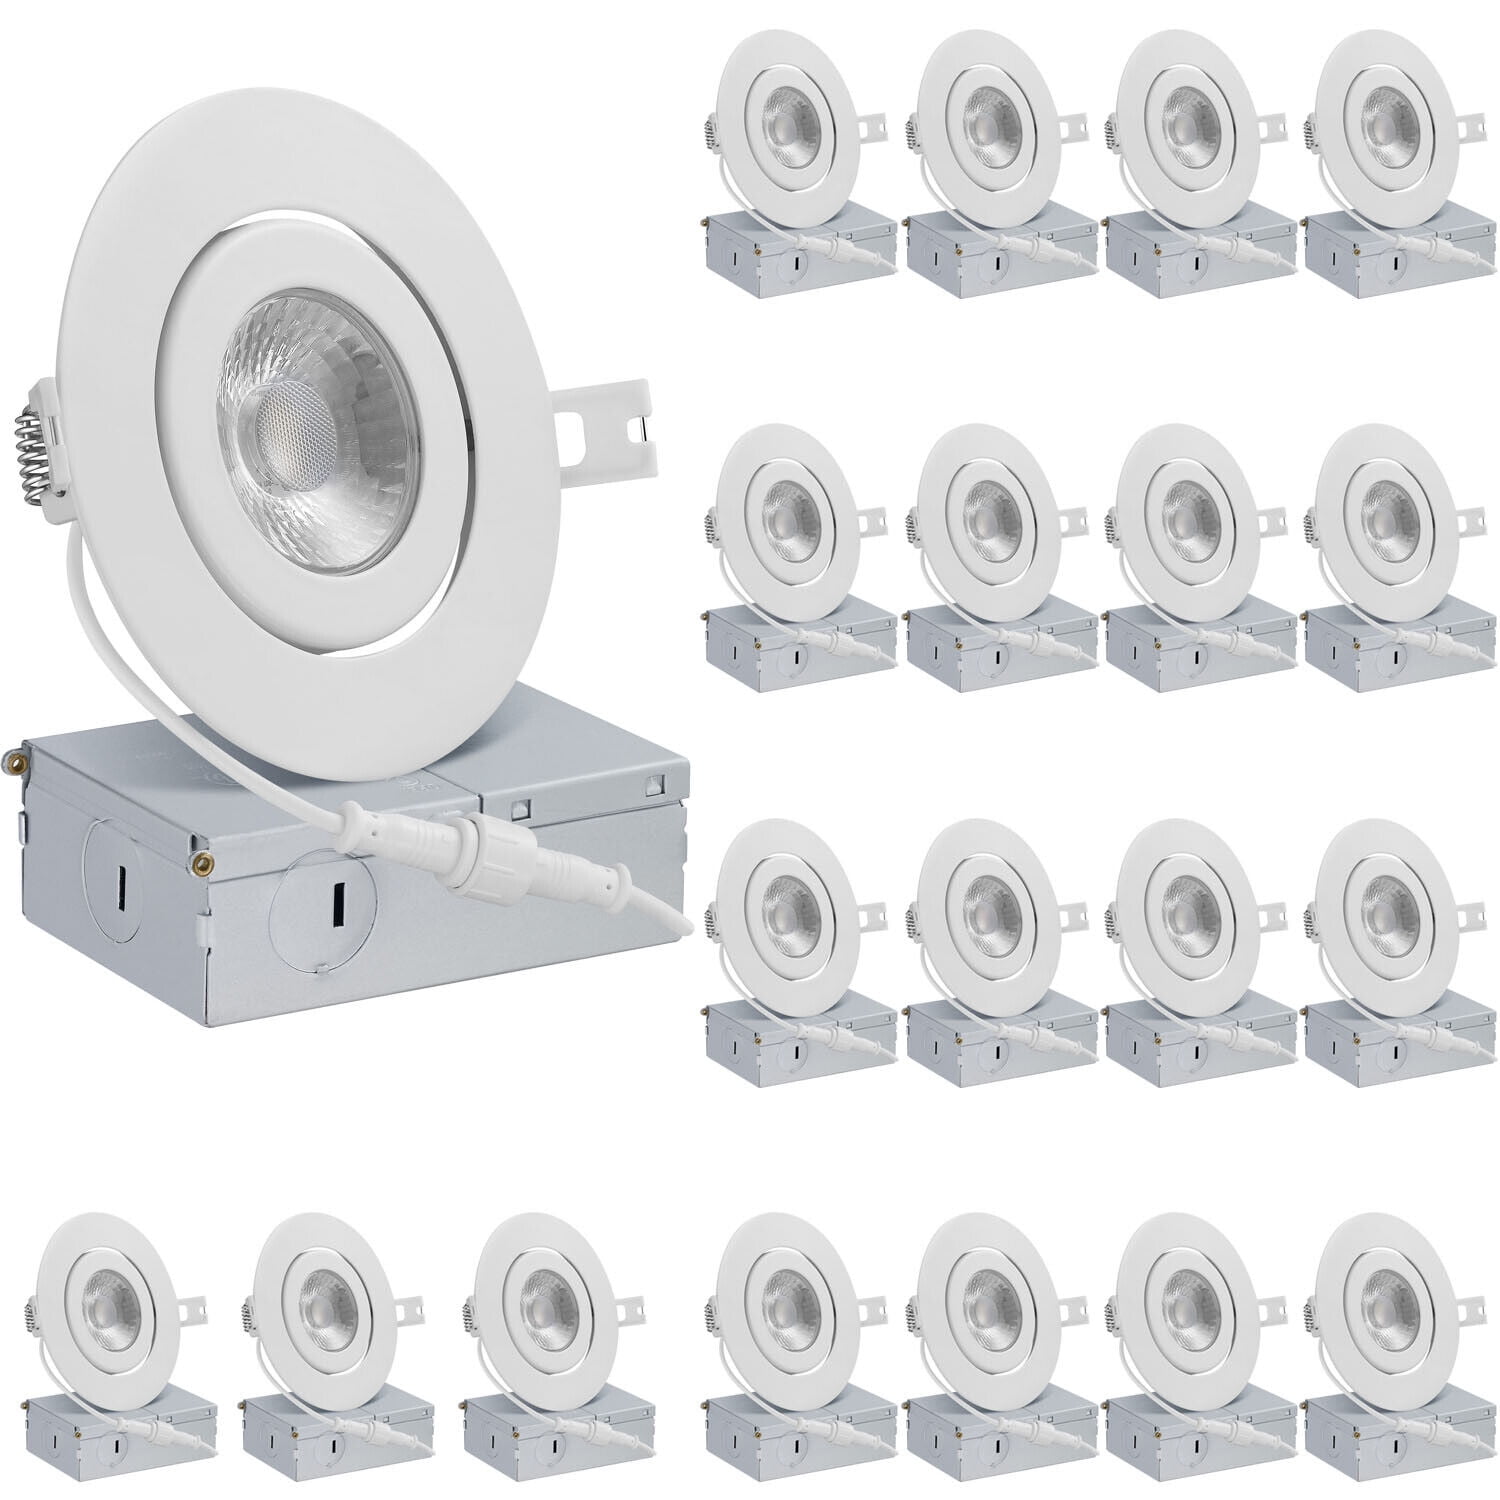 QPLUS Inch Ultra-Thin Adjustable Eyeball Gimbal LED Recessed Lighting  with Junction Box/Canless Downlight, 10 Watts, 750lm, Dimmable, Energy Star  and ETL Listed (5000K Daylight, 20 Pack)